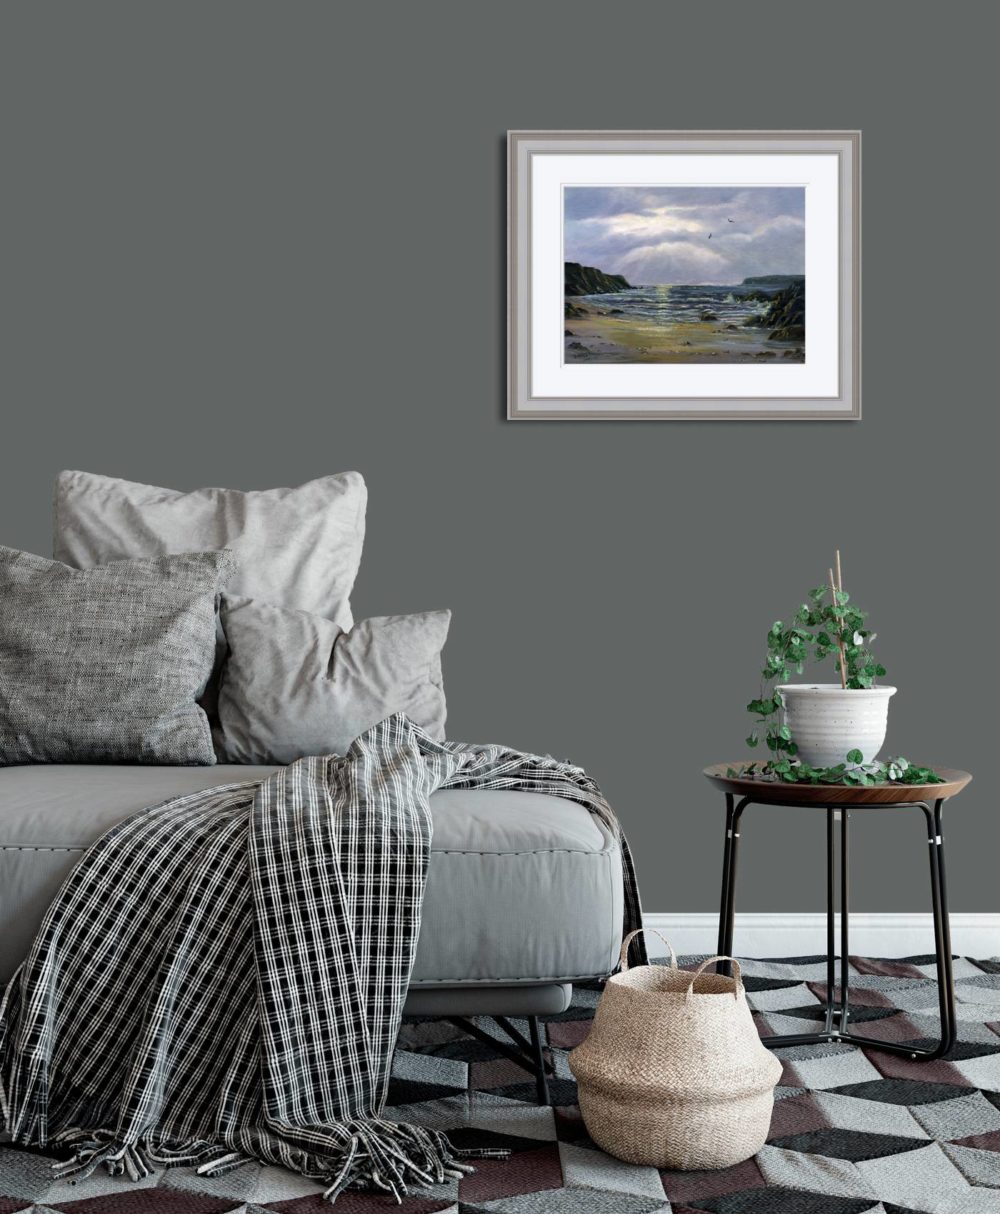 Evening On The North Coast Print (Small) In Grey Frame In Room